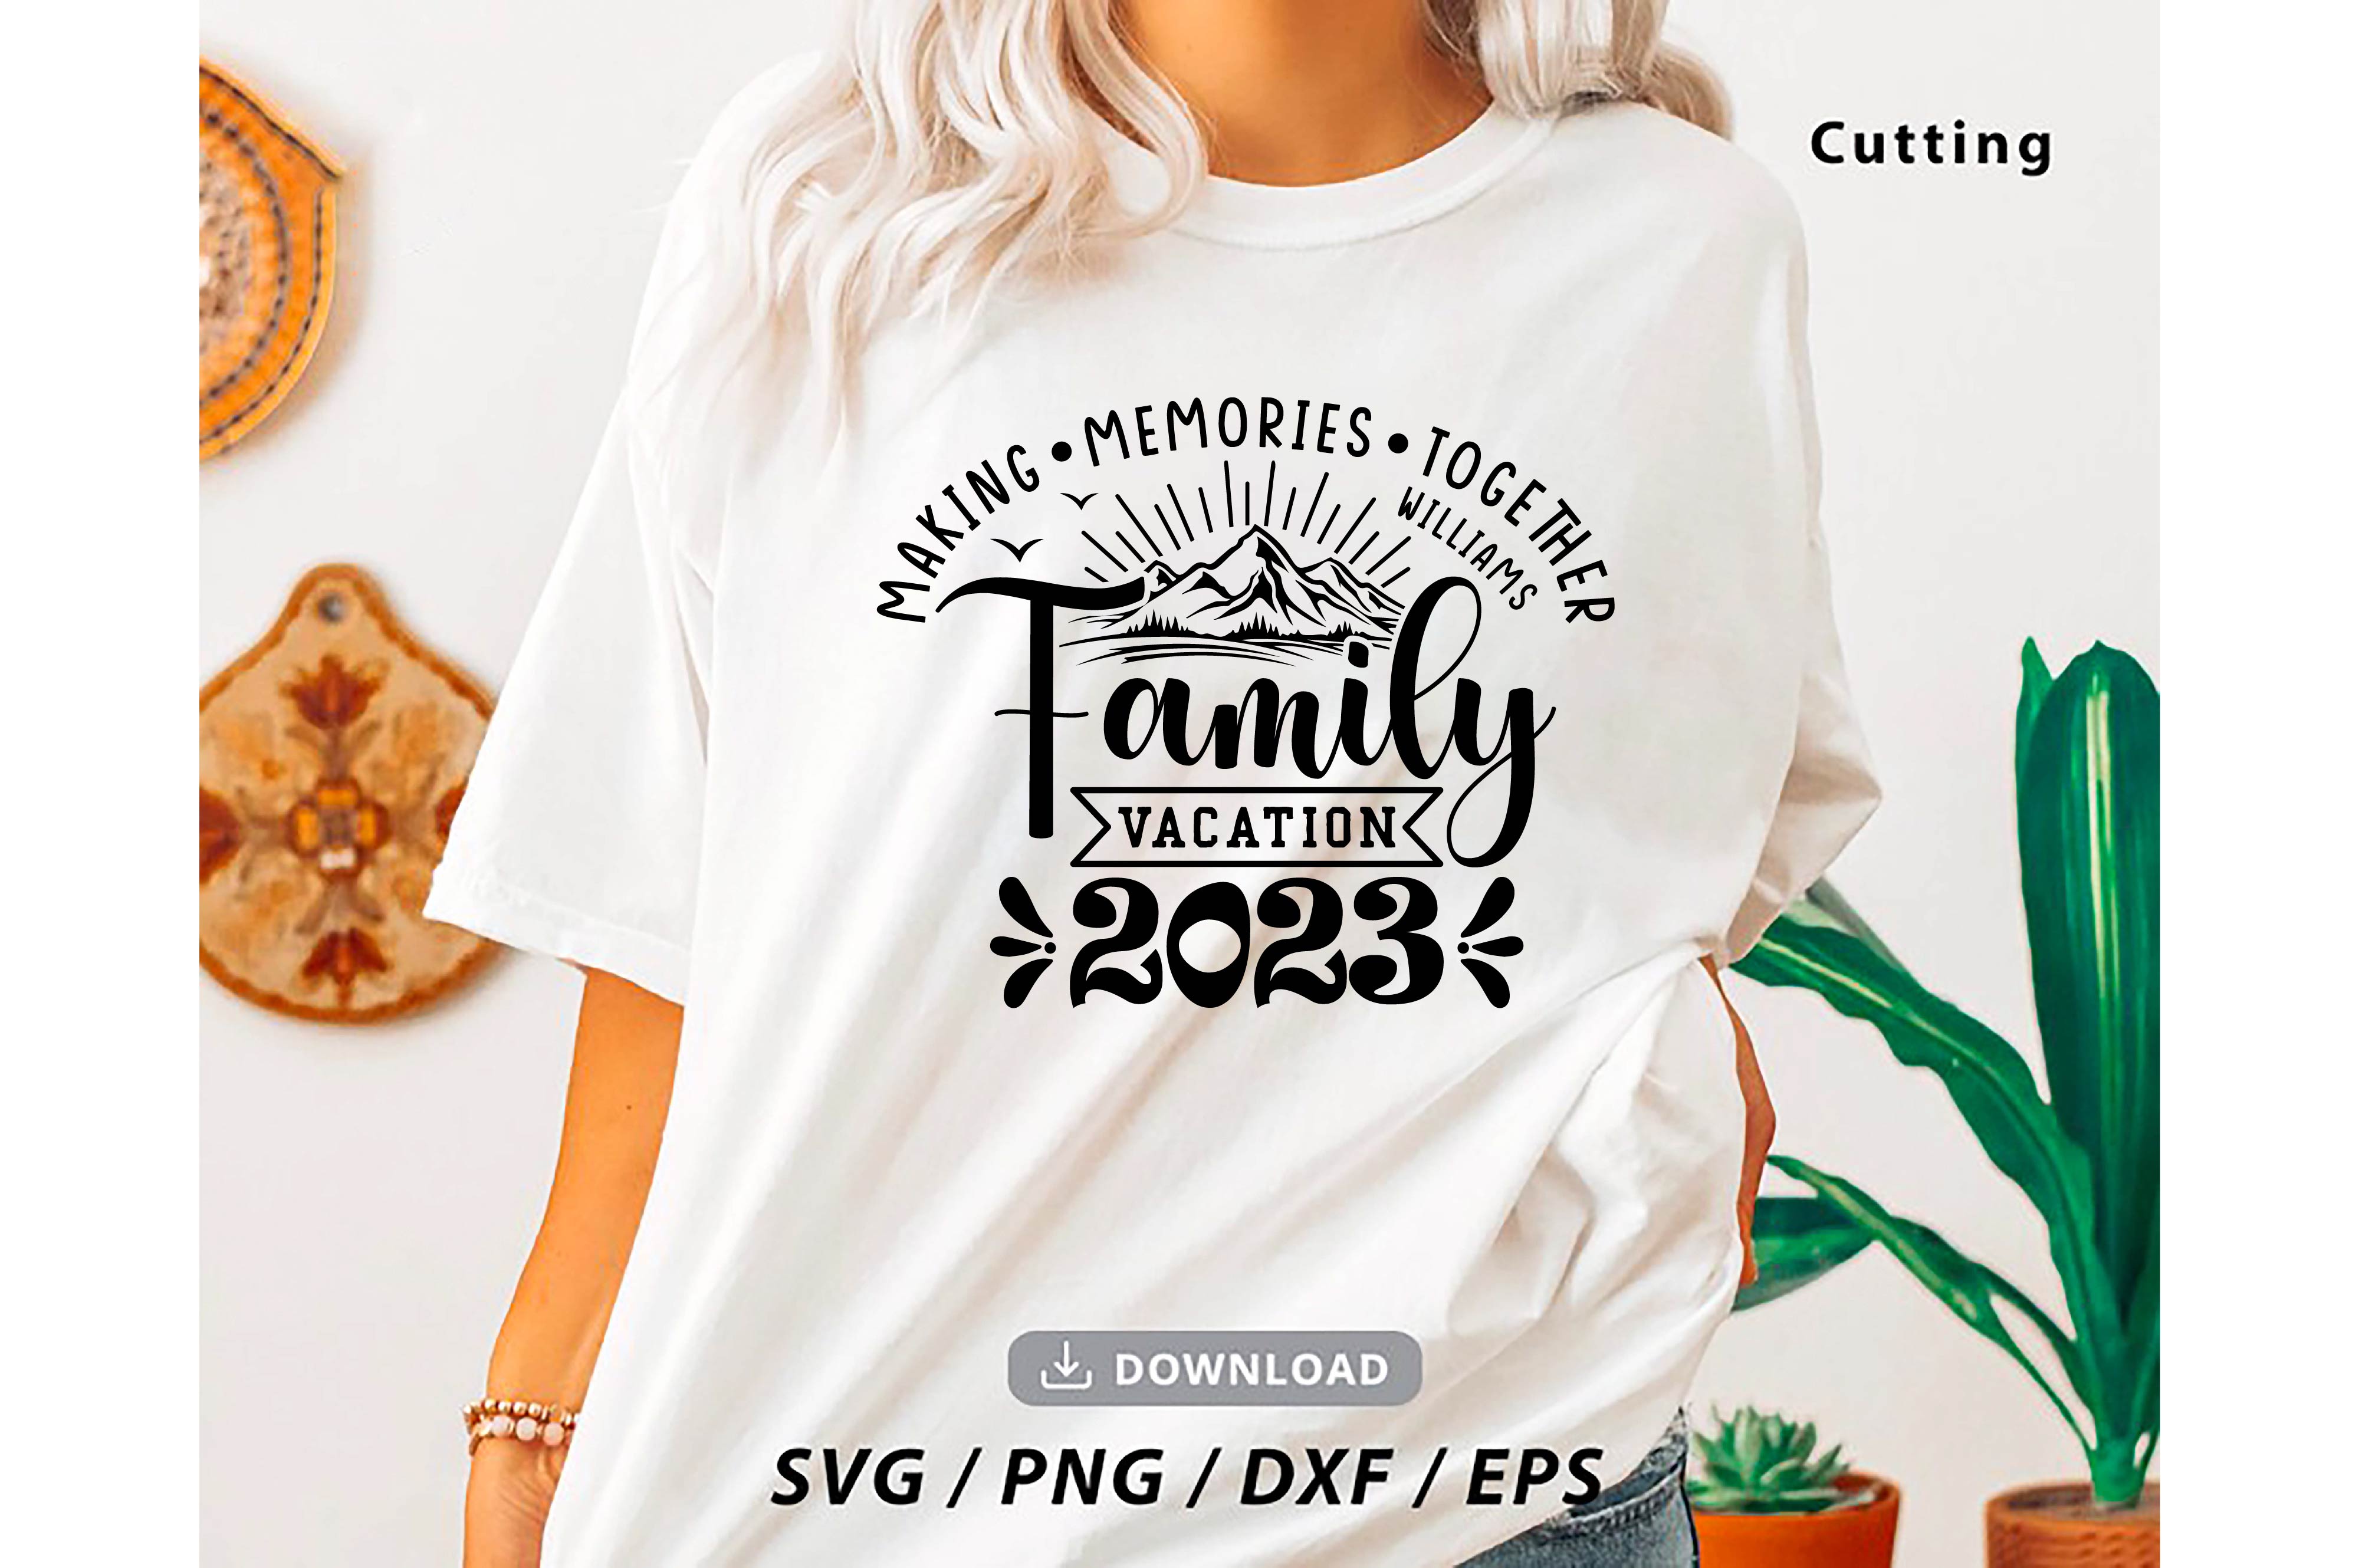 family vacation 2023 svg making memories together custom family vacation cut files summer 2023 vacations 13 41